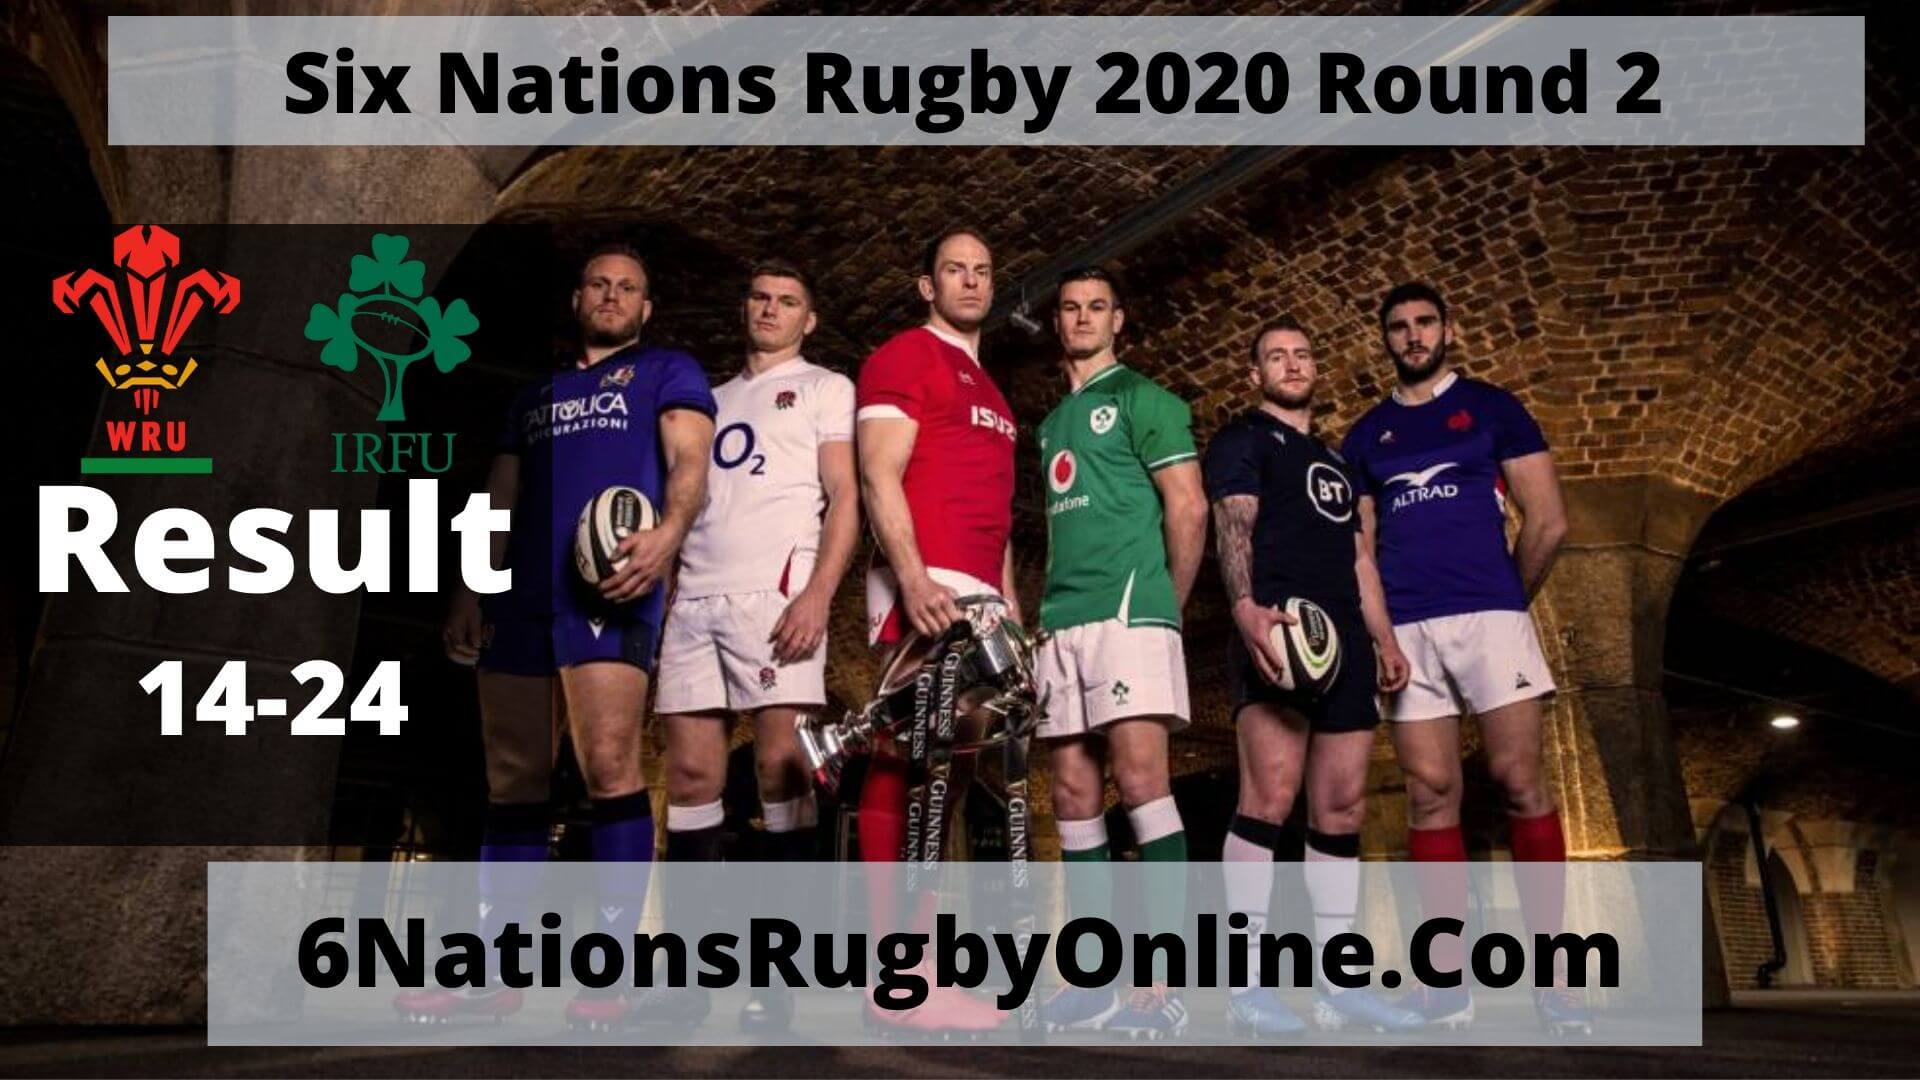 Ireland Vs Wales Result 2020 | Six Nations Rugby Round 2